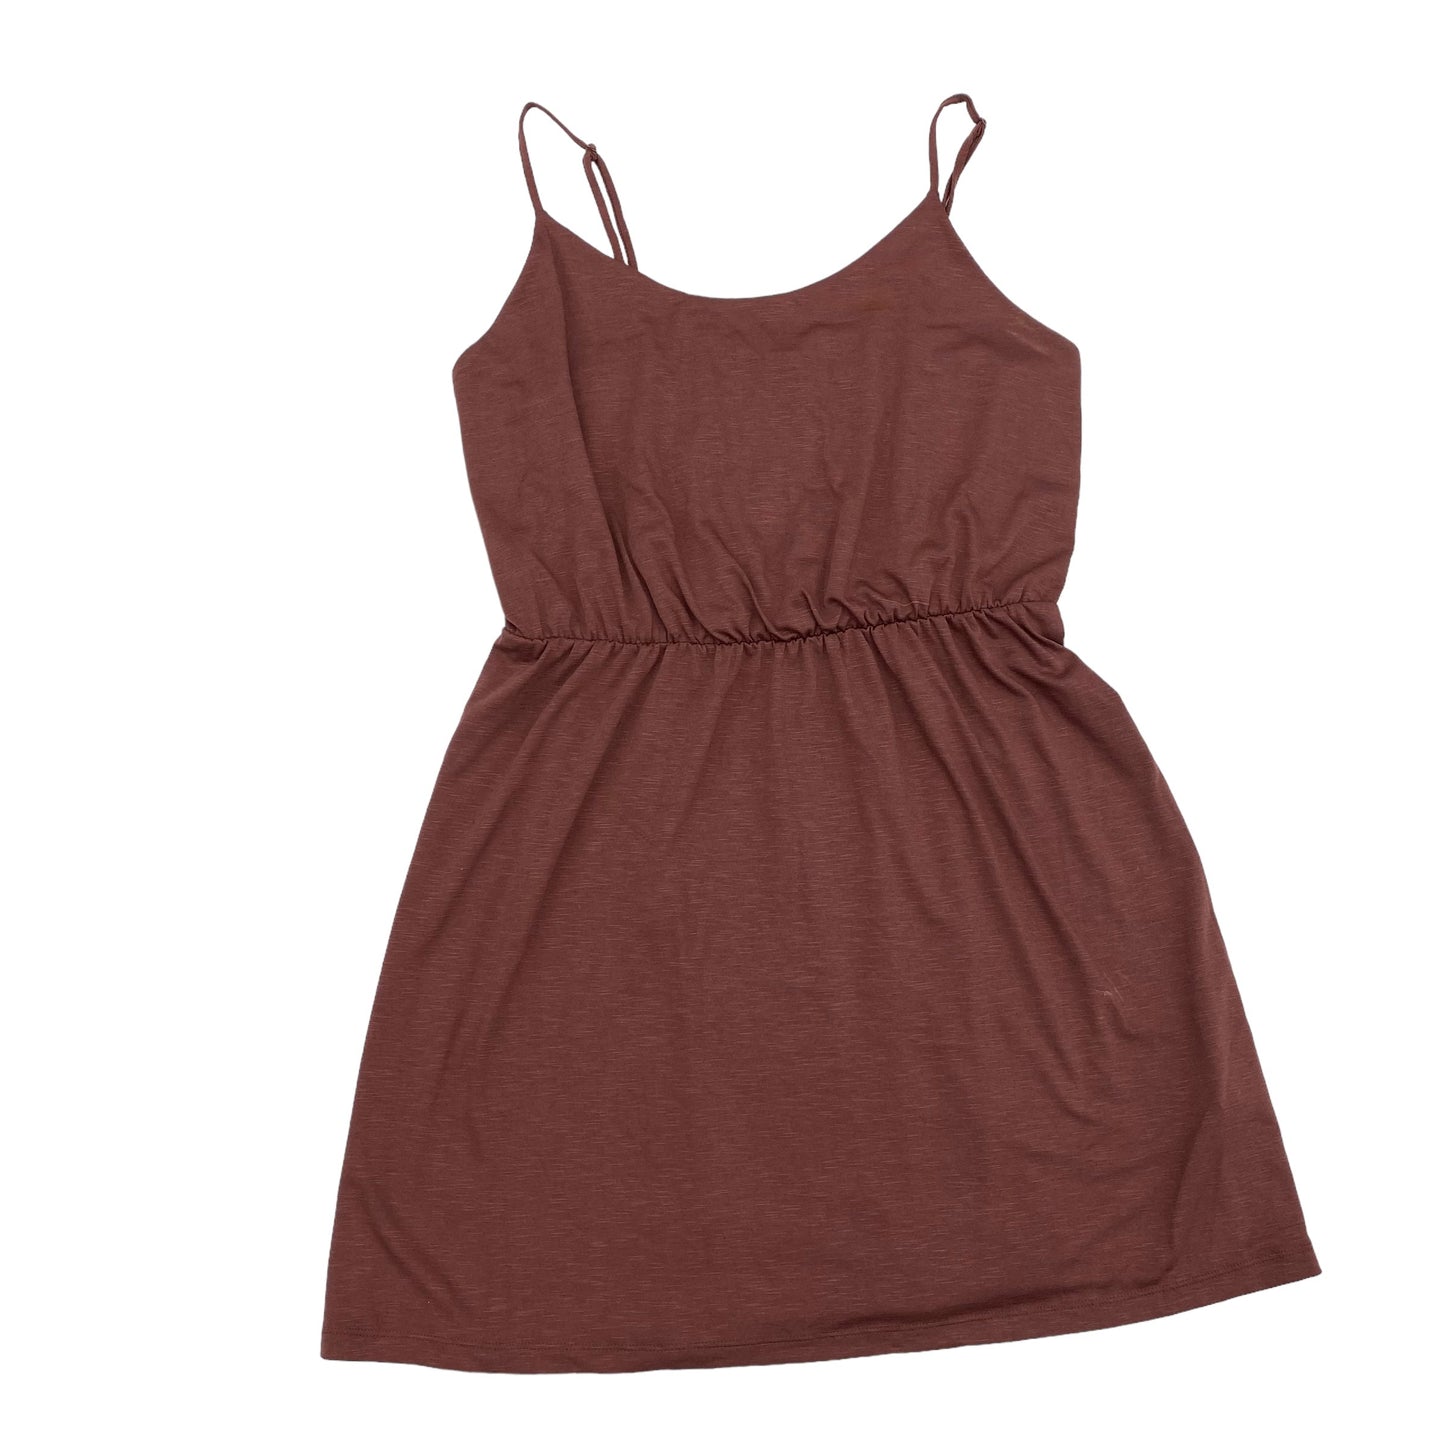 BROWN OLD NAVY DRESS CASUAL SHORT, Size L